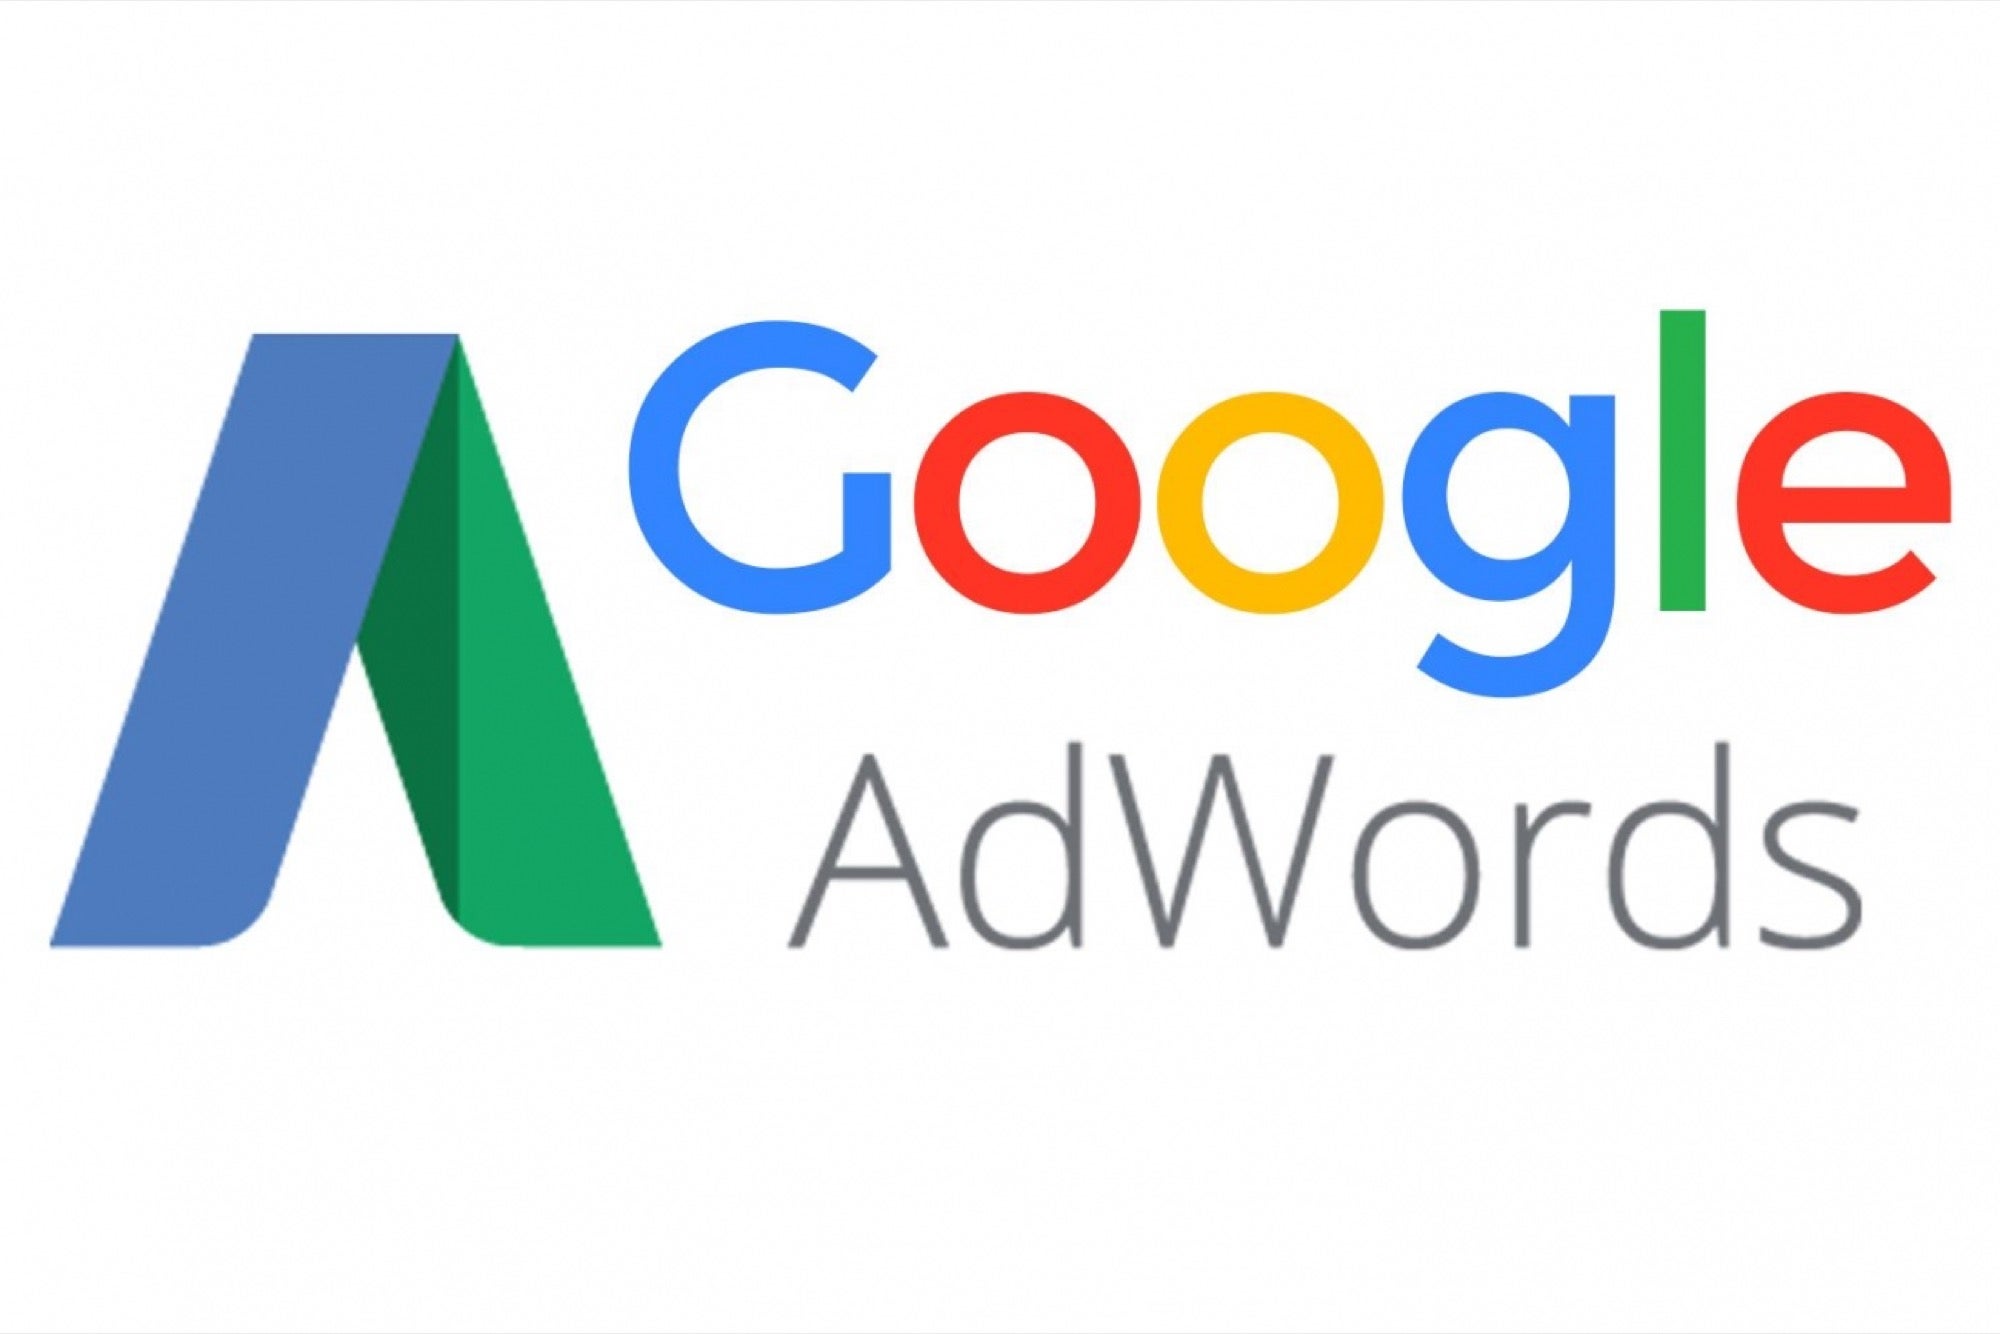 How To Promote Your YouTube Videos With Google Adwords